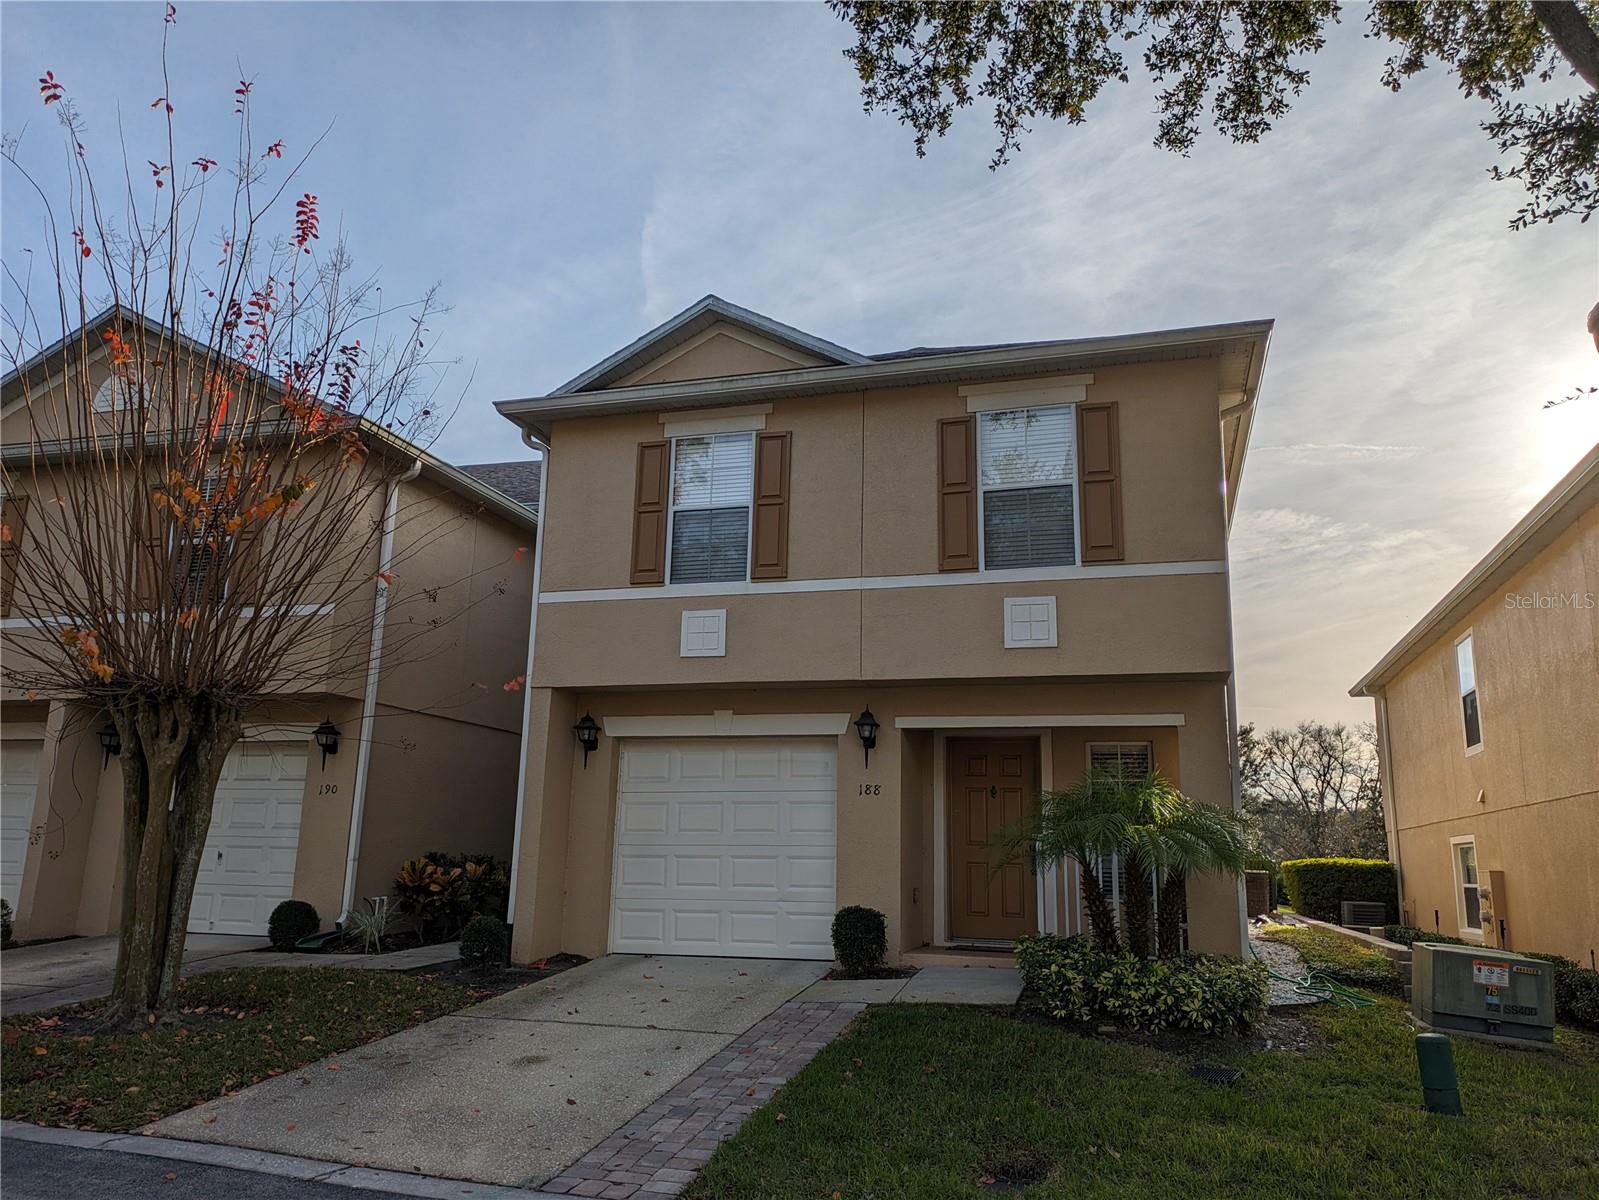 View ALTAMONTE SPRINGS, FL 32714 townhome